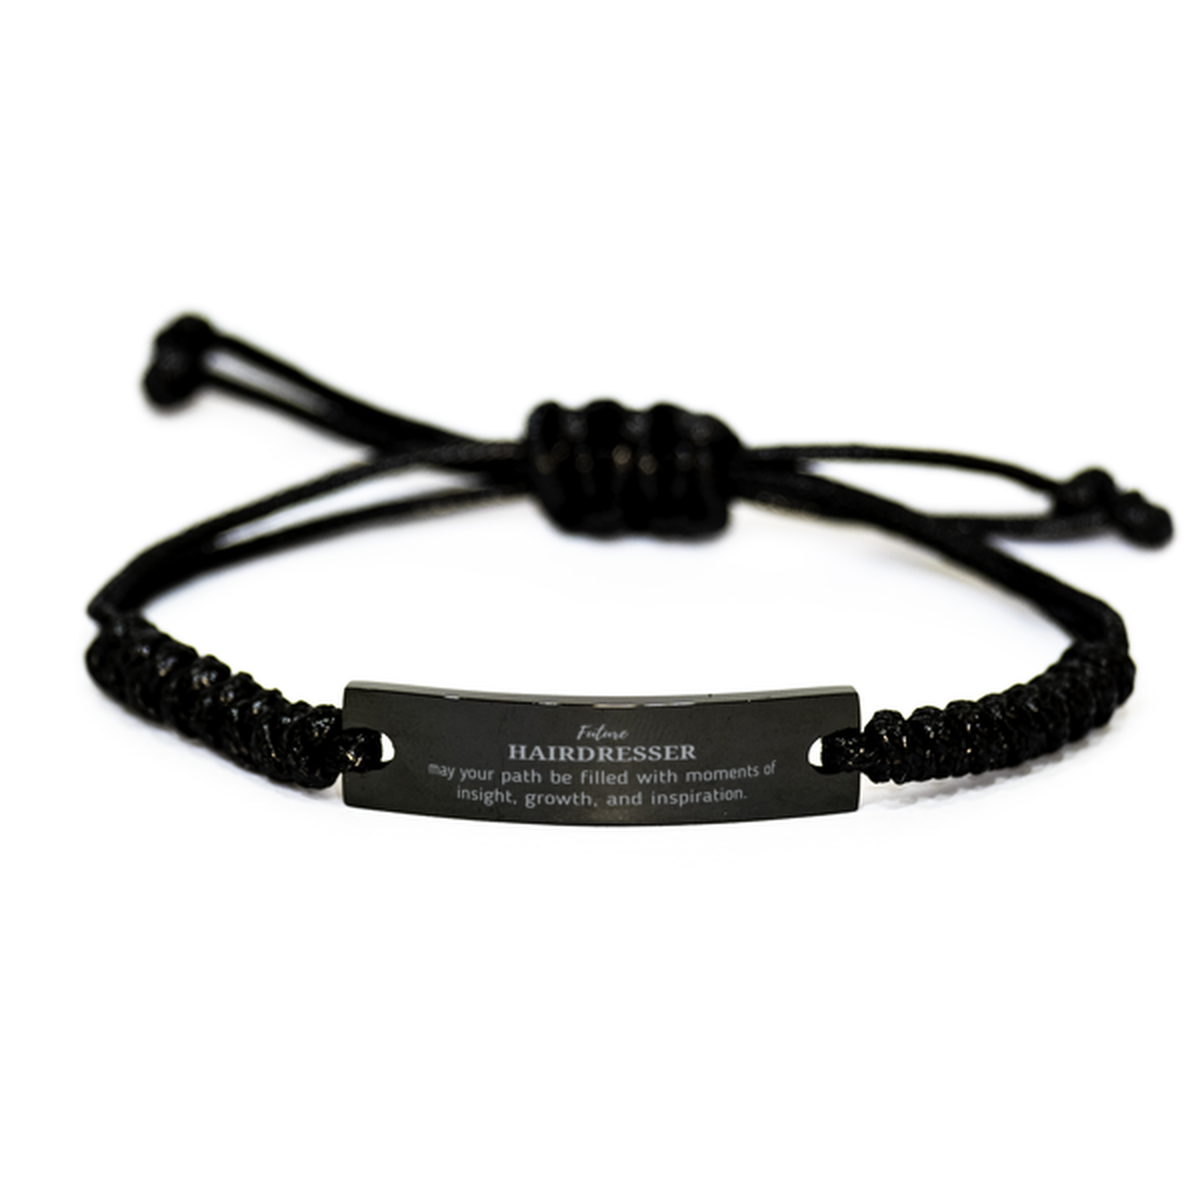 Future Hairdresser Gifts, May your path be filled with moments of insight, Graduation Gifts for New Hairdresser, Christmas Unique Black Rope Bracelet For Men, Women, Friends